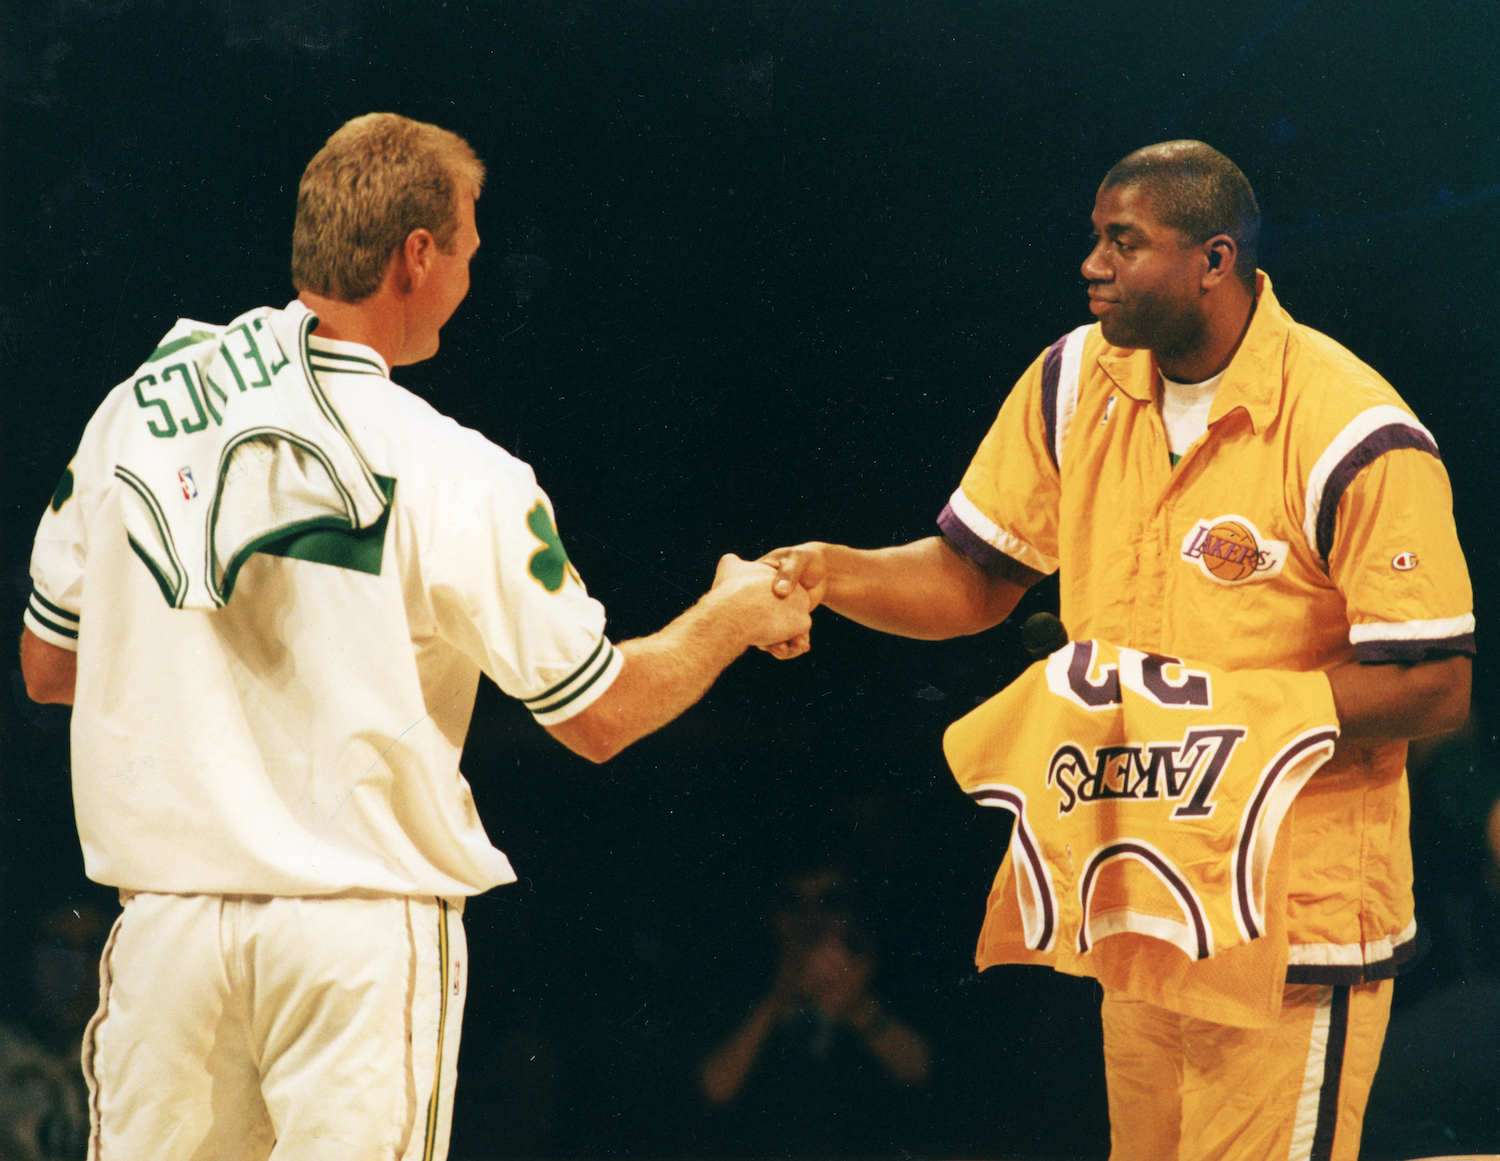 Magic Johnson and Larry Bird had quite an NBA rivalry, but they put their differences aside ahead of a 1993 game.